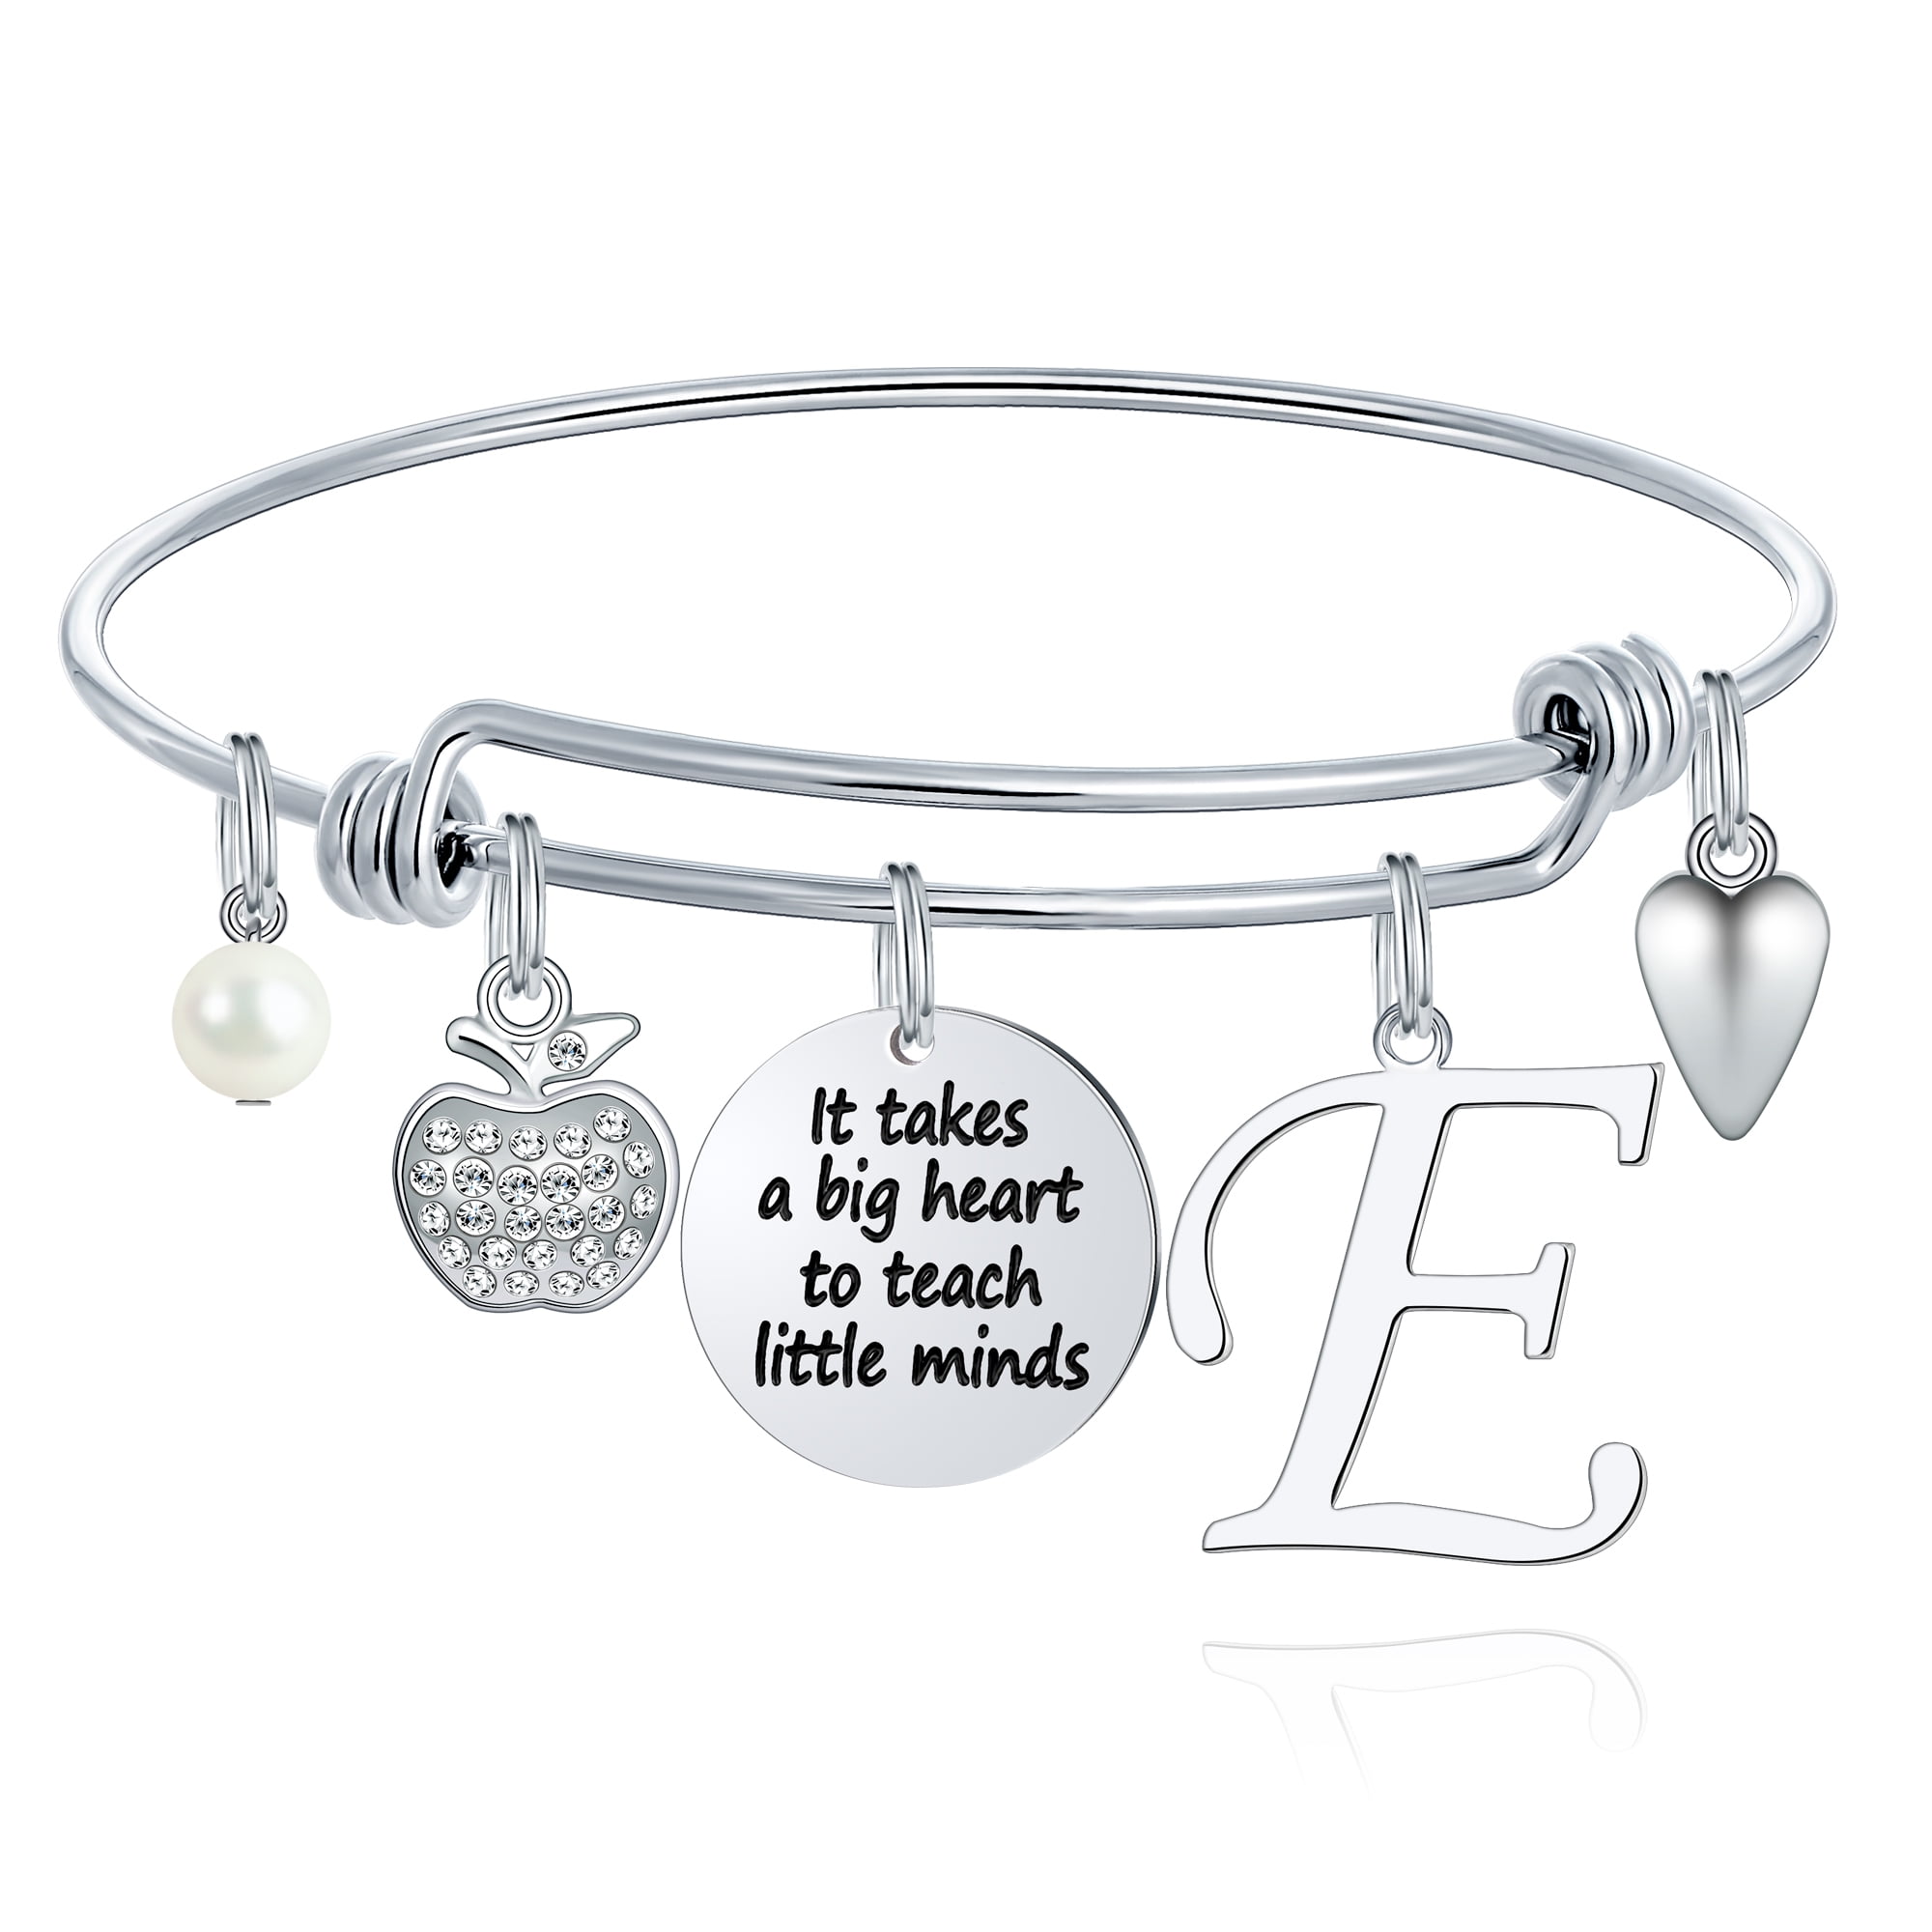 Teacher Apple Bracelet or Anklet YOU Select Your Cord Color and Length